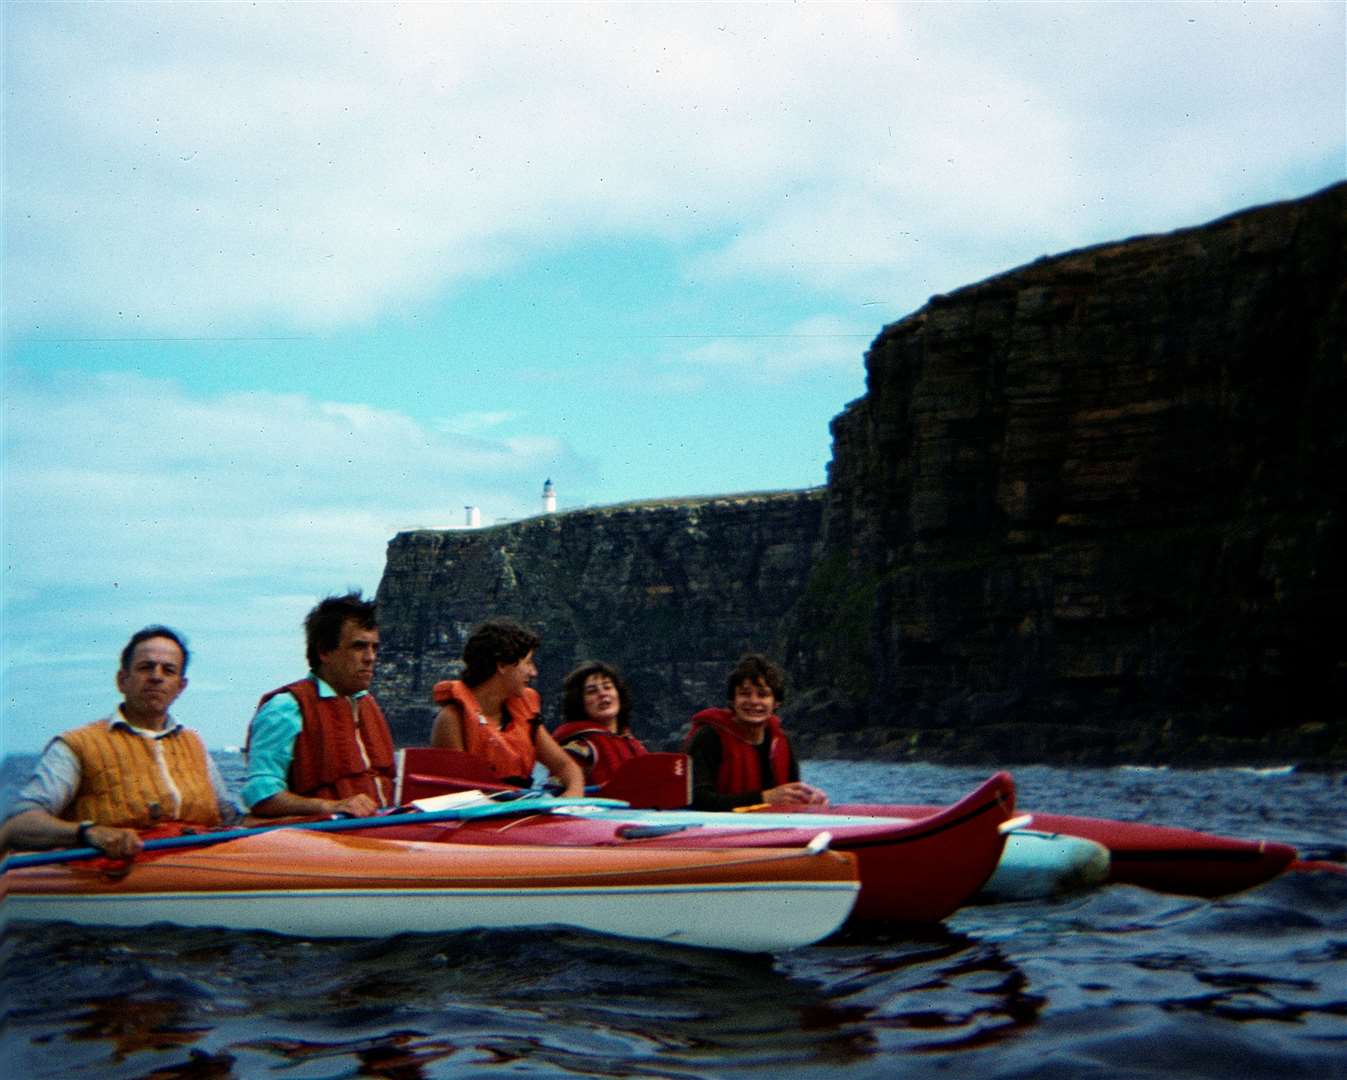 1984 Dunnet Head: The first trip around Dunnet Head – the most northerly point on the mainland.